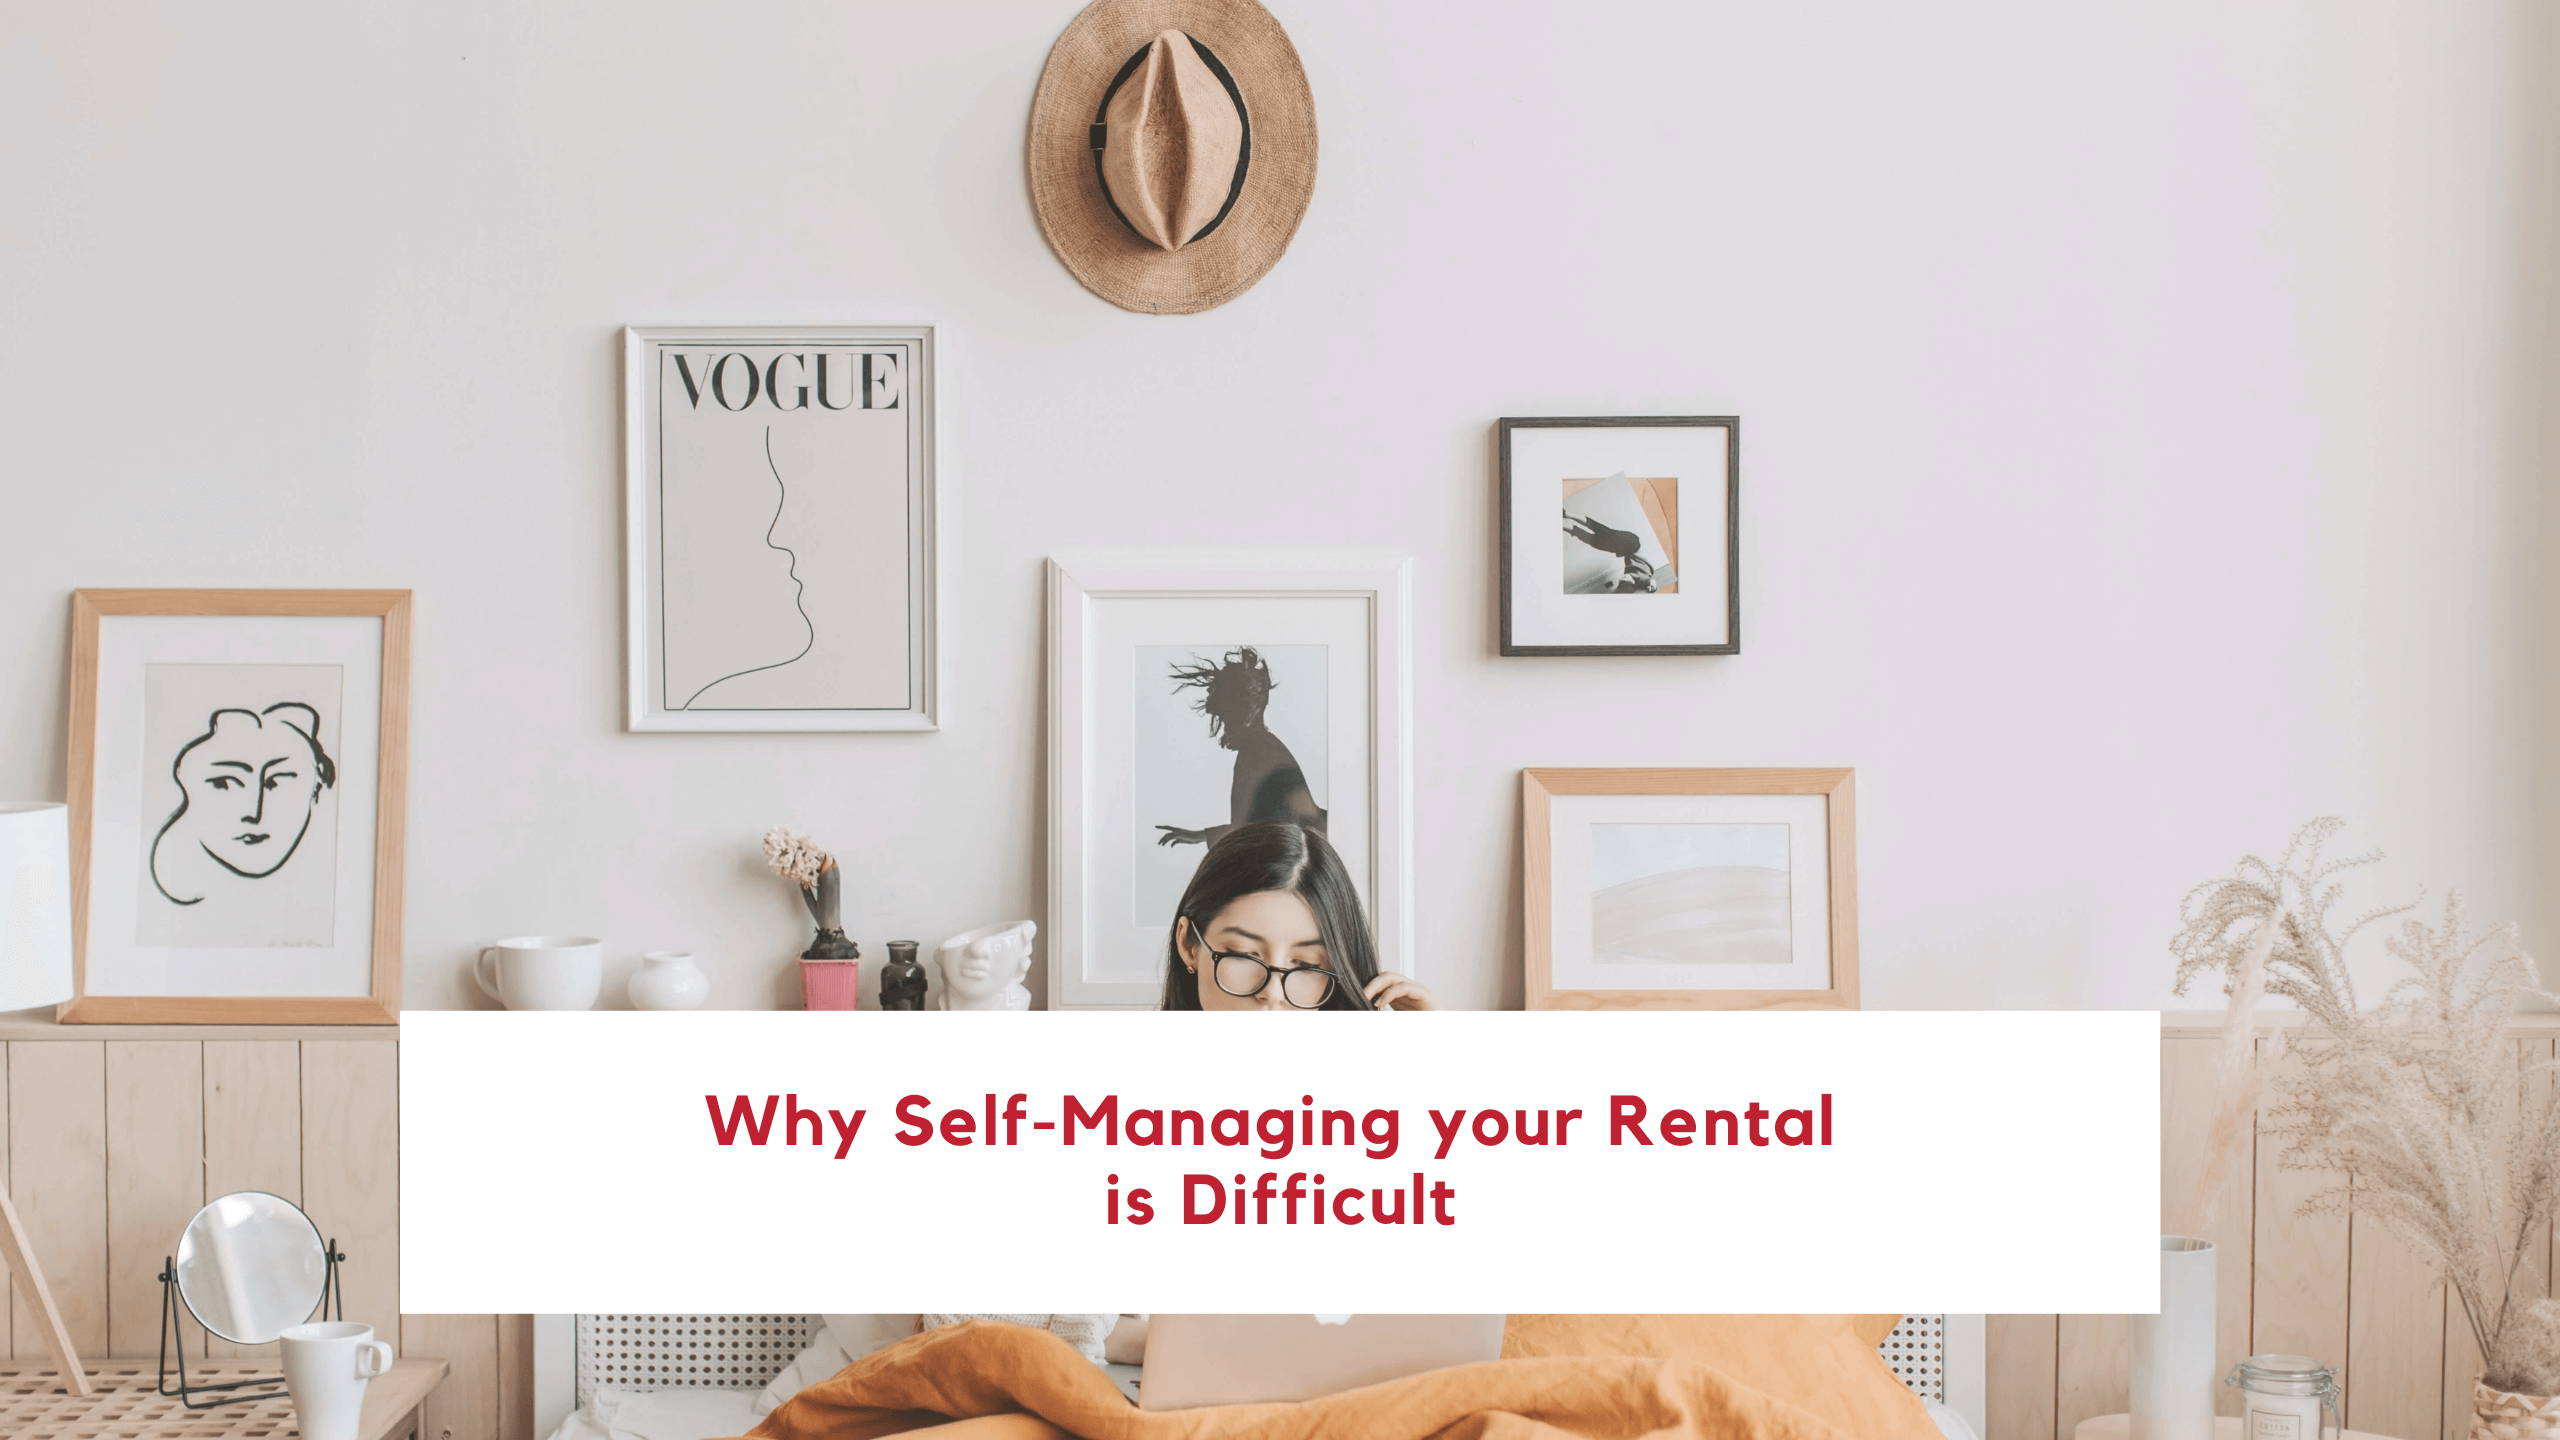 Why Self-Managing your Rental Property in California is so Difficult